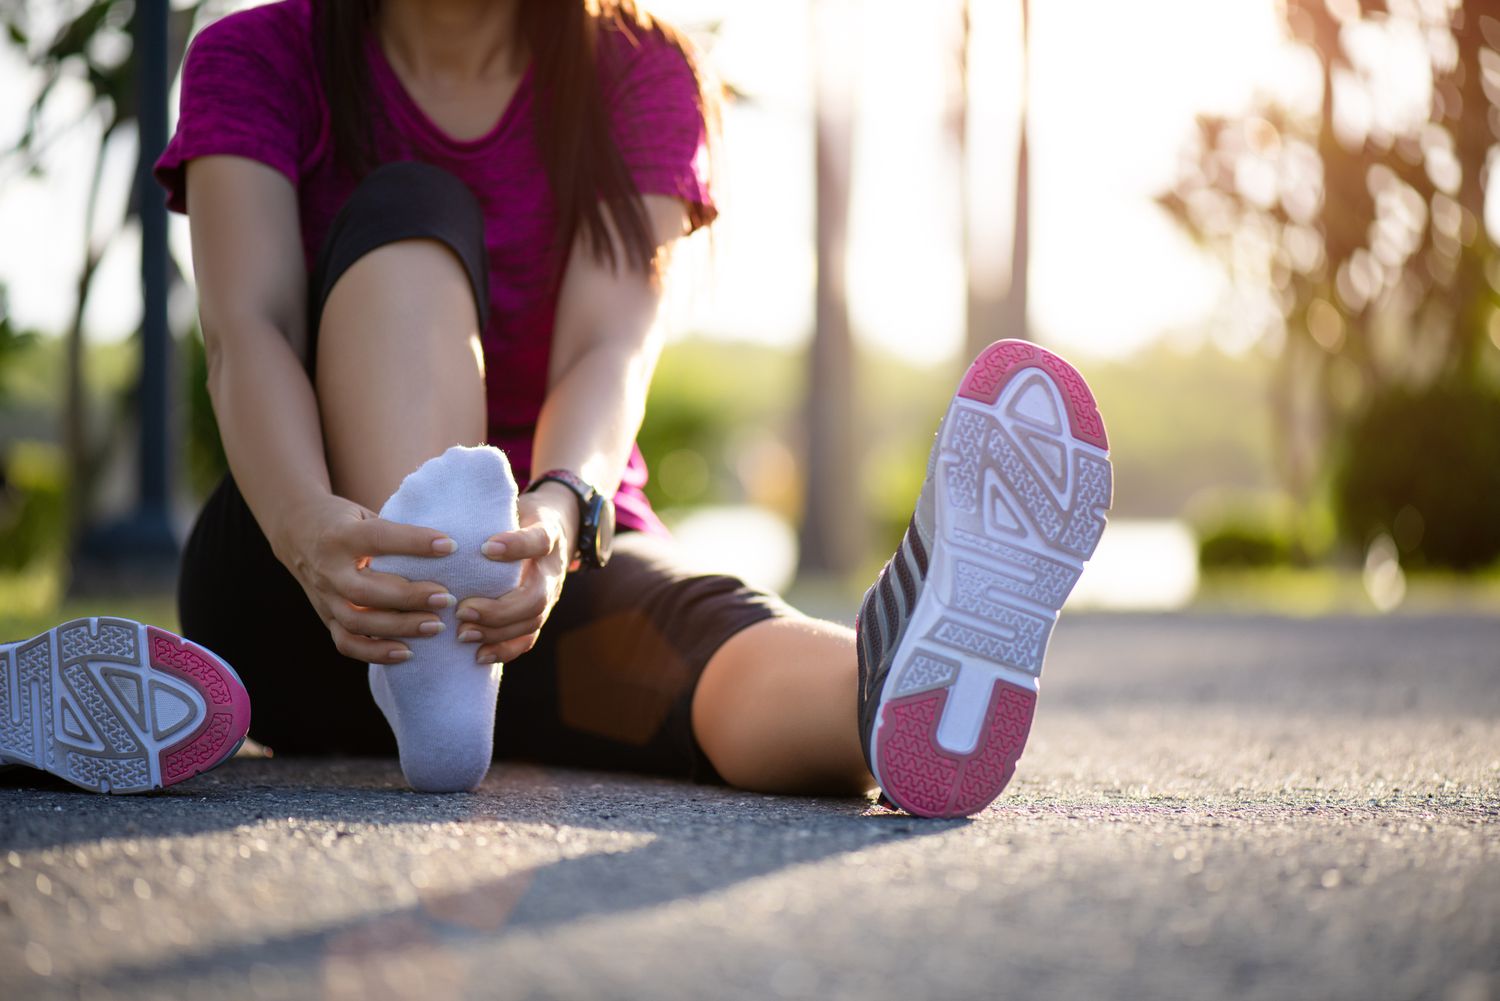 Young woman massaging her painful foot while exercising. Running Sport and exercise injury concept.